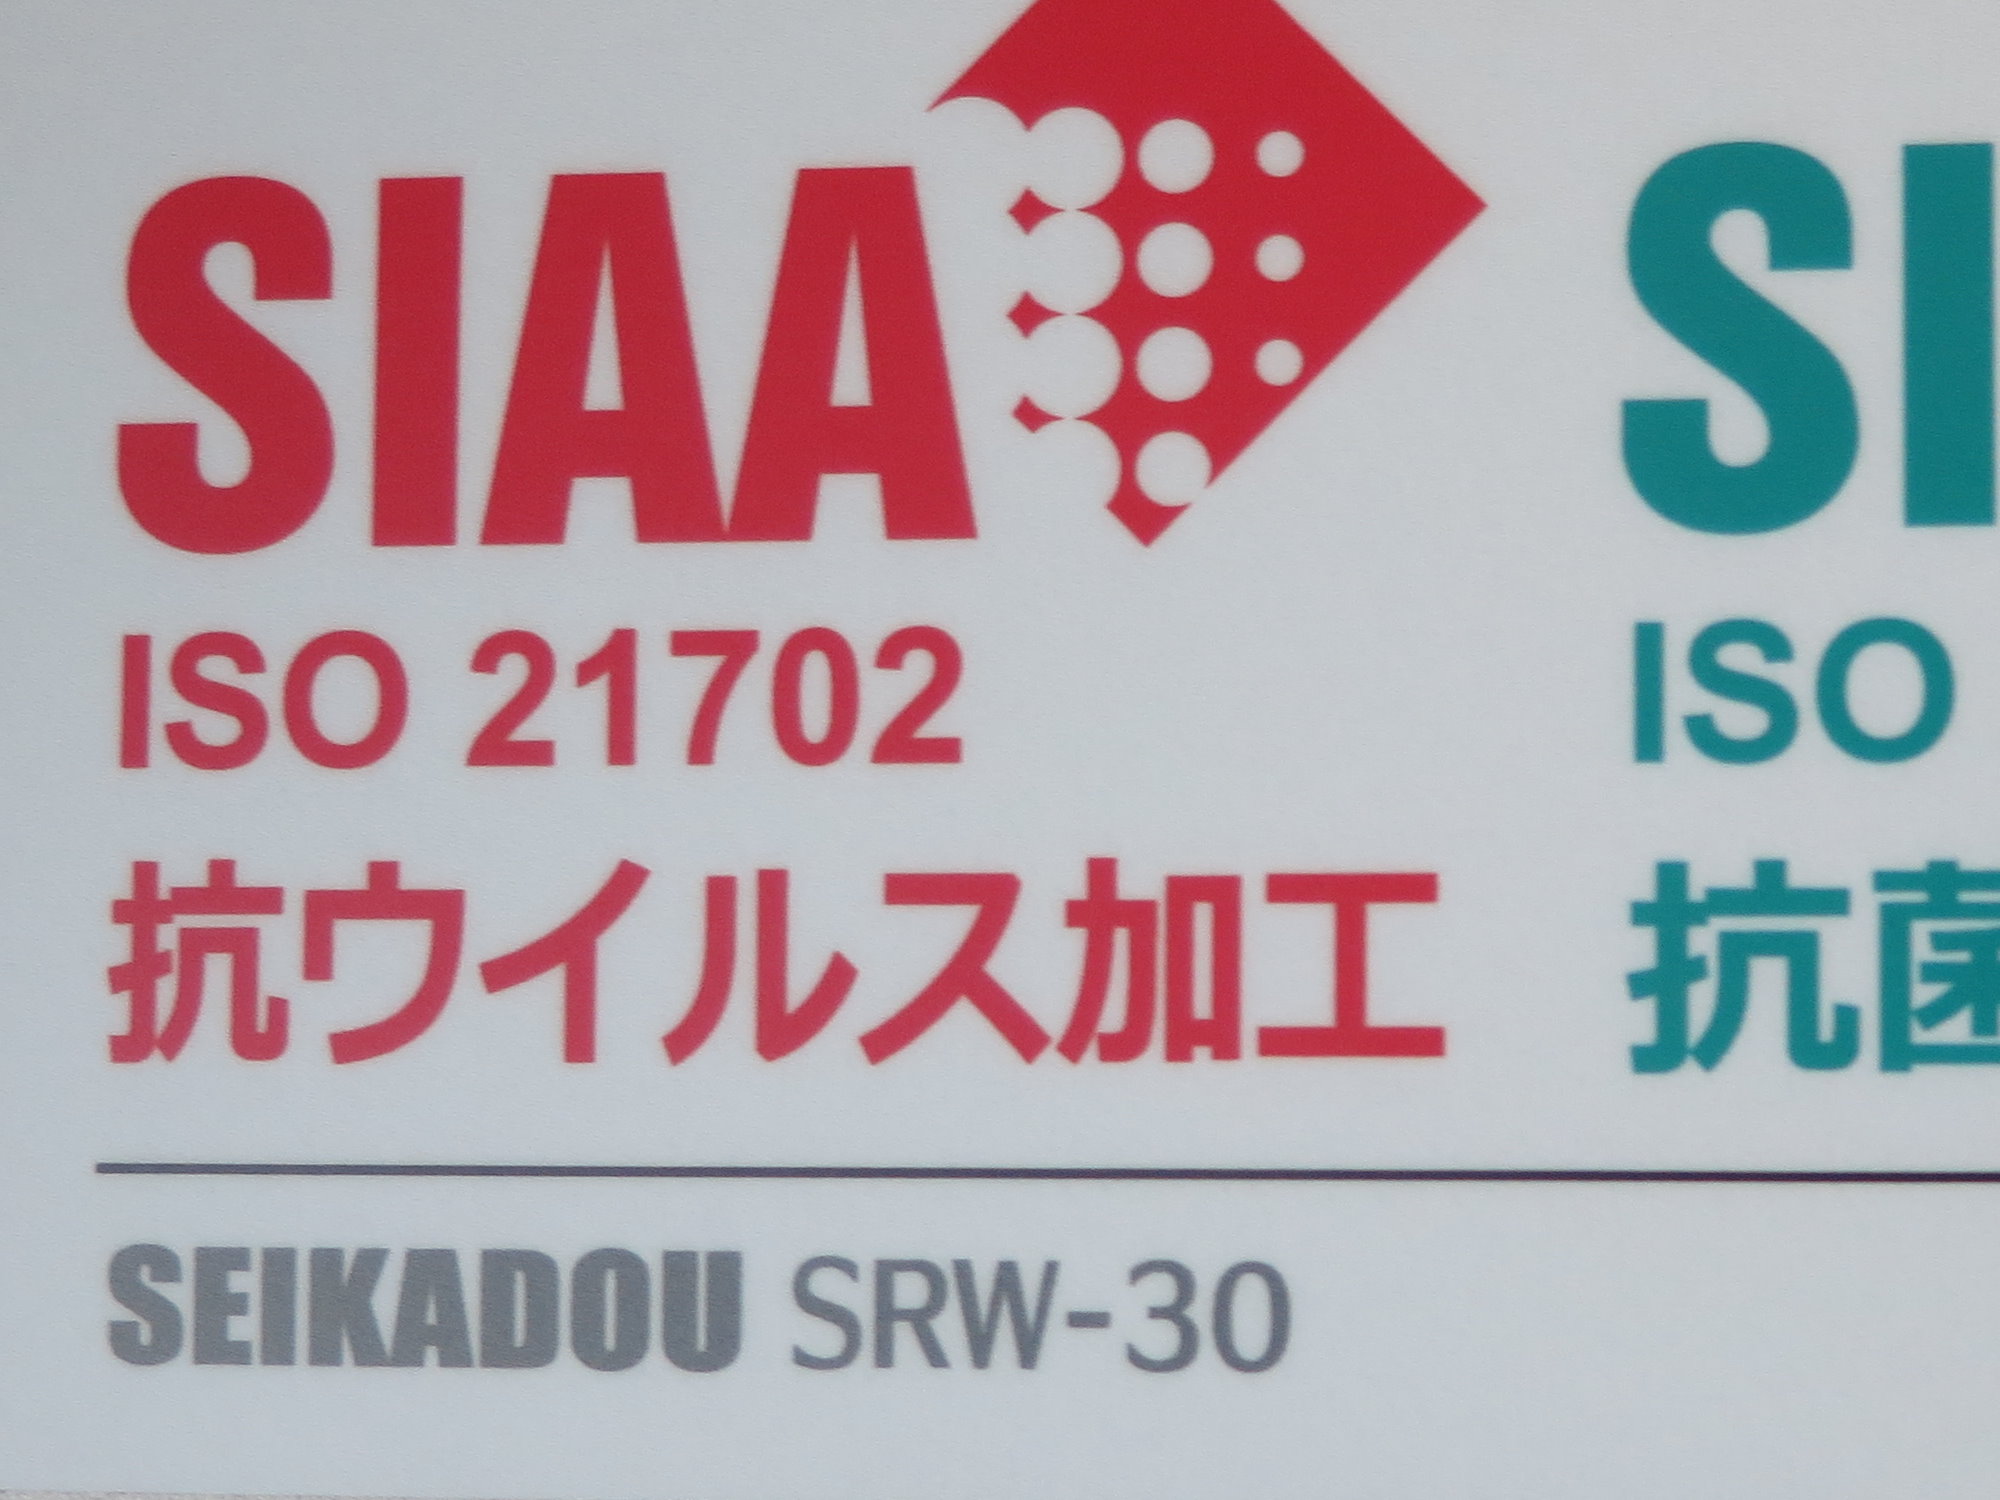 ISO 21702